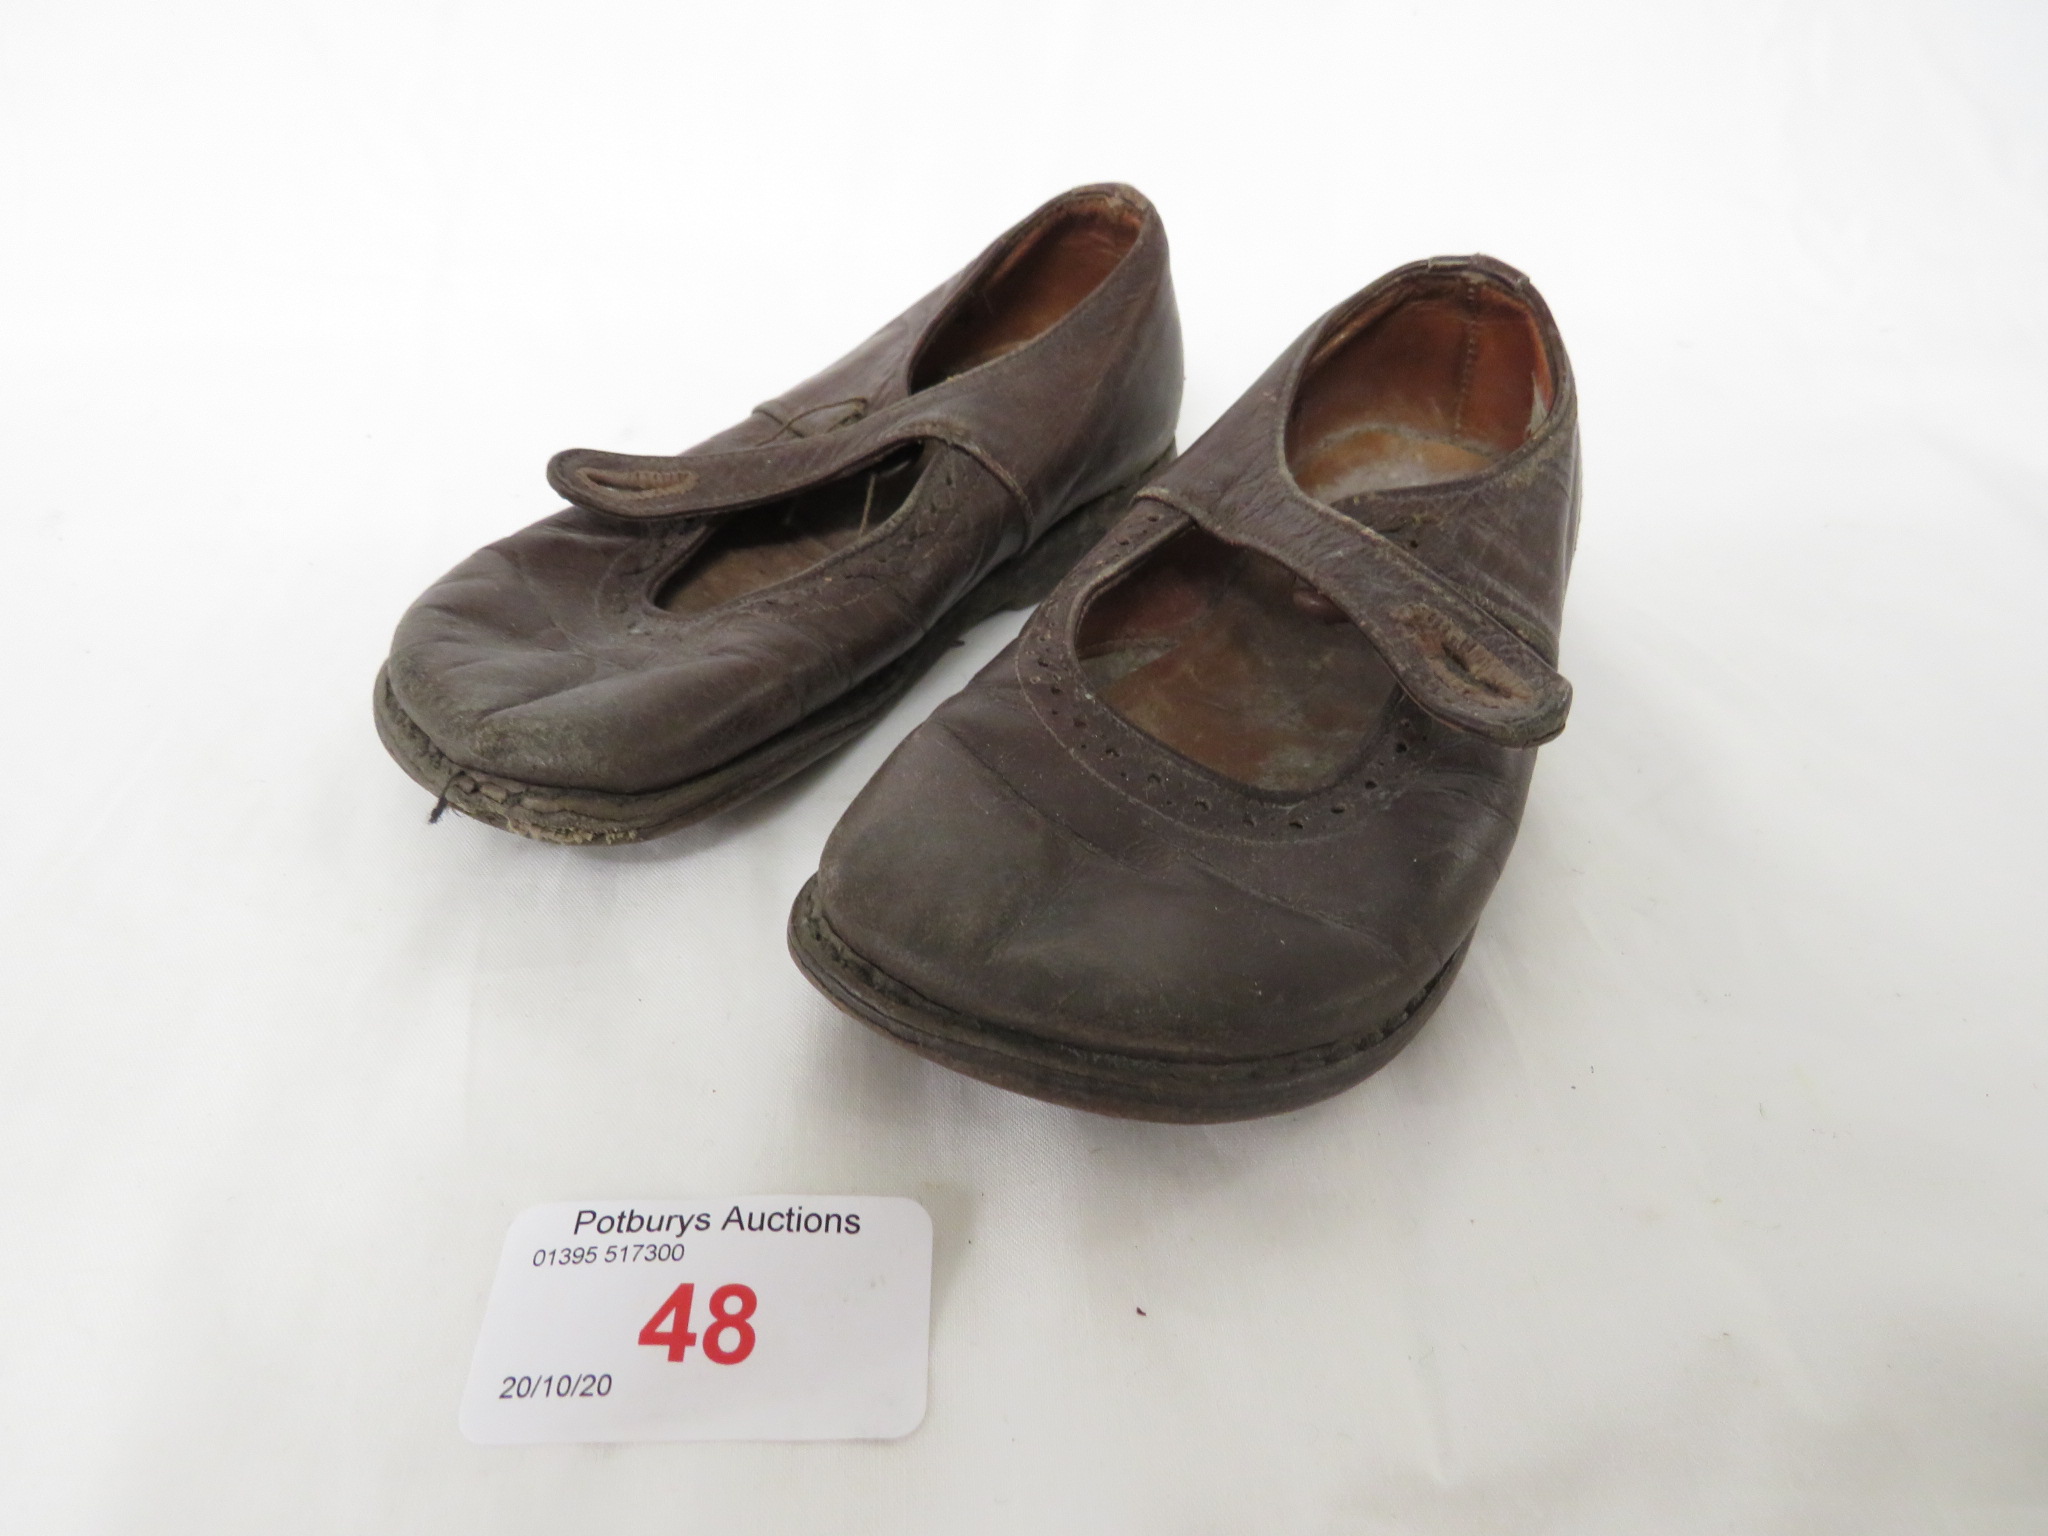 PAIR OF VINTAGE BROWN LEATHER BABY SHOES